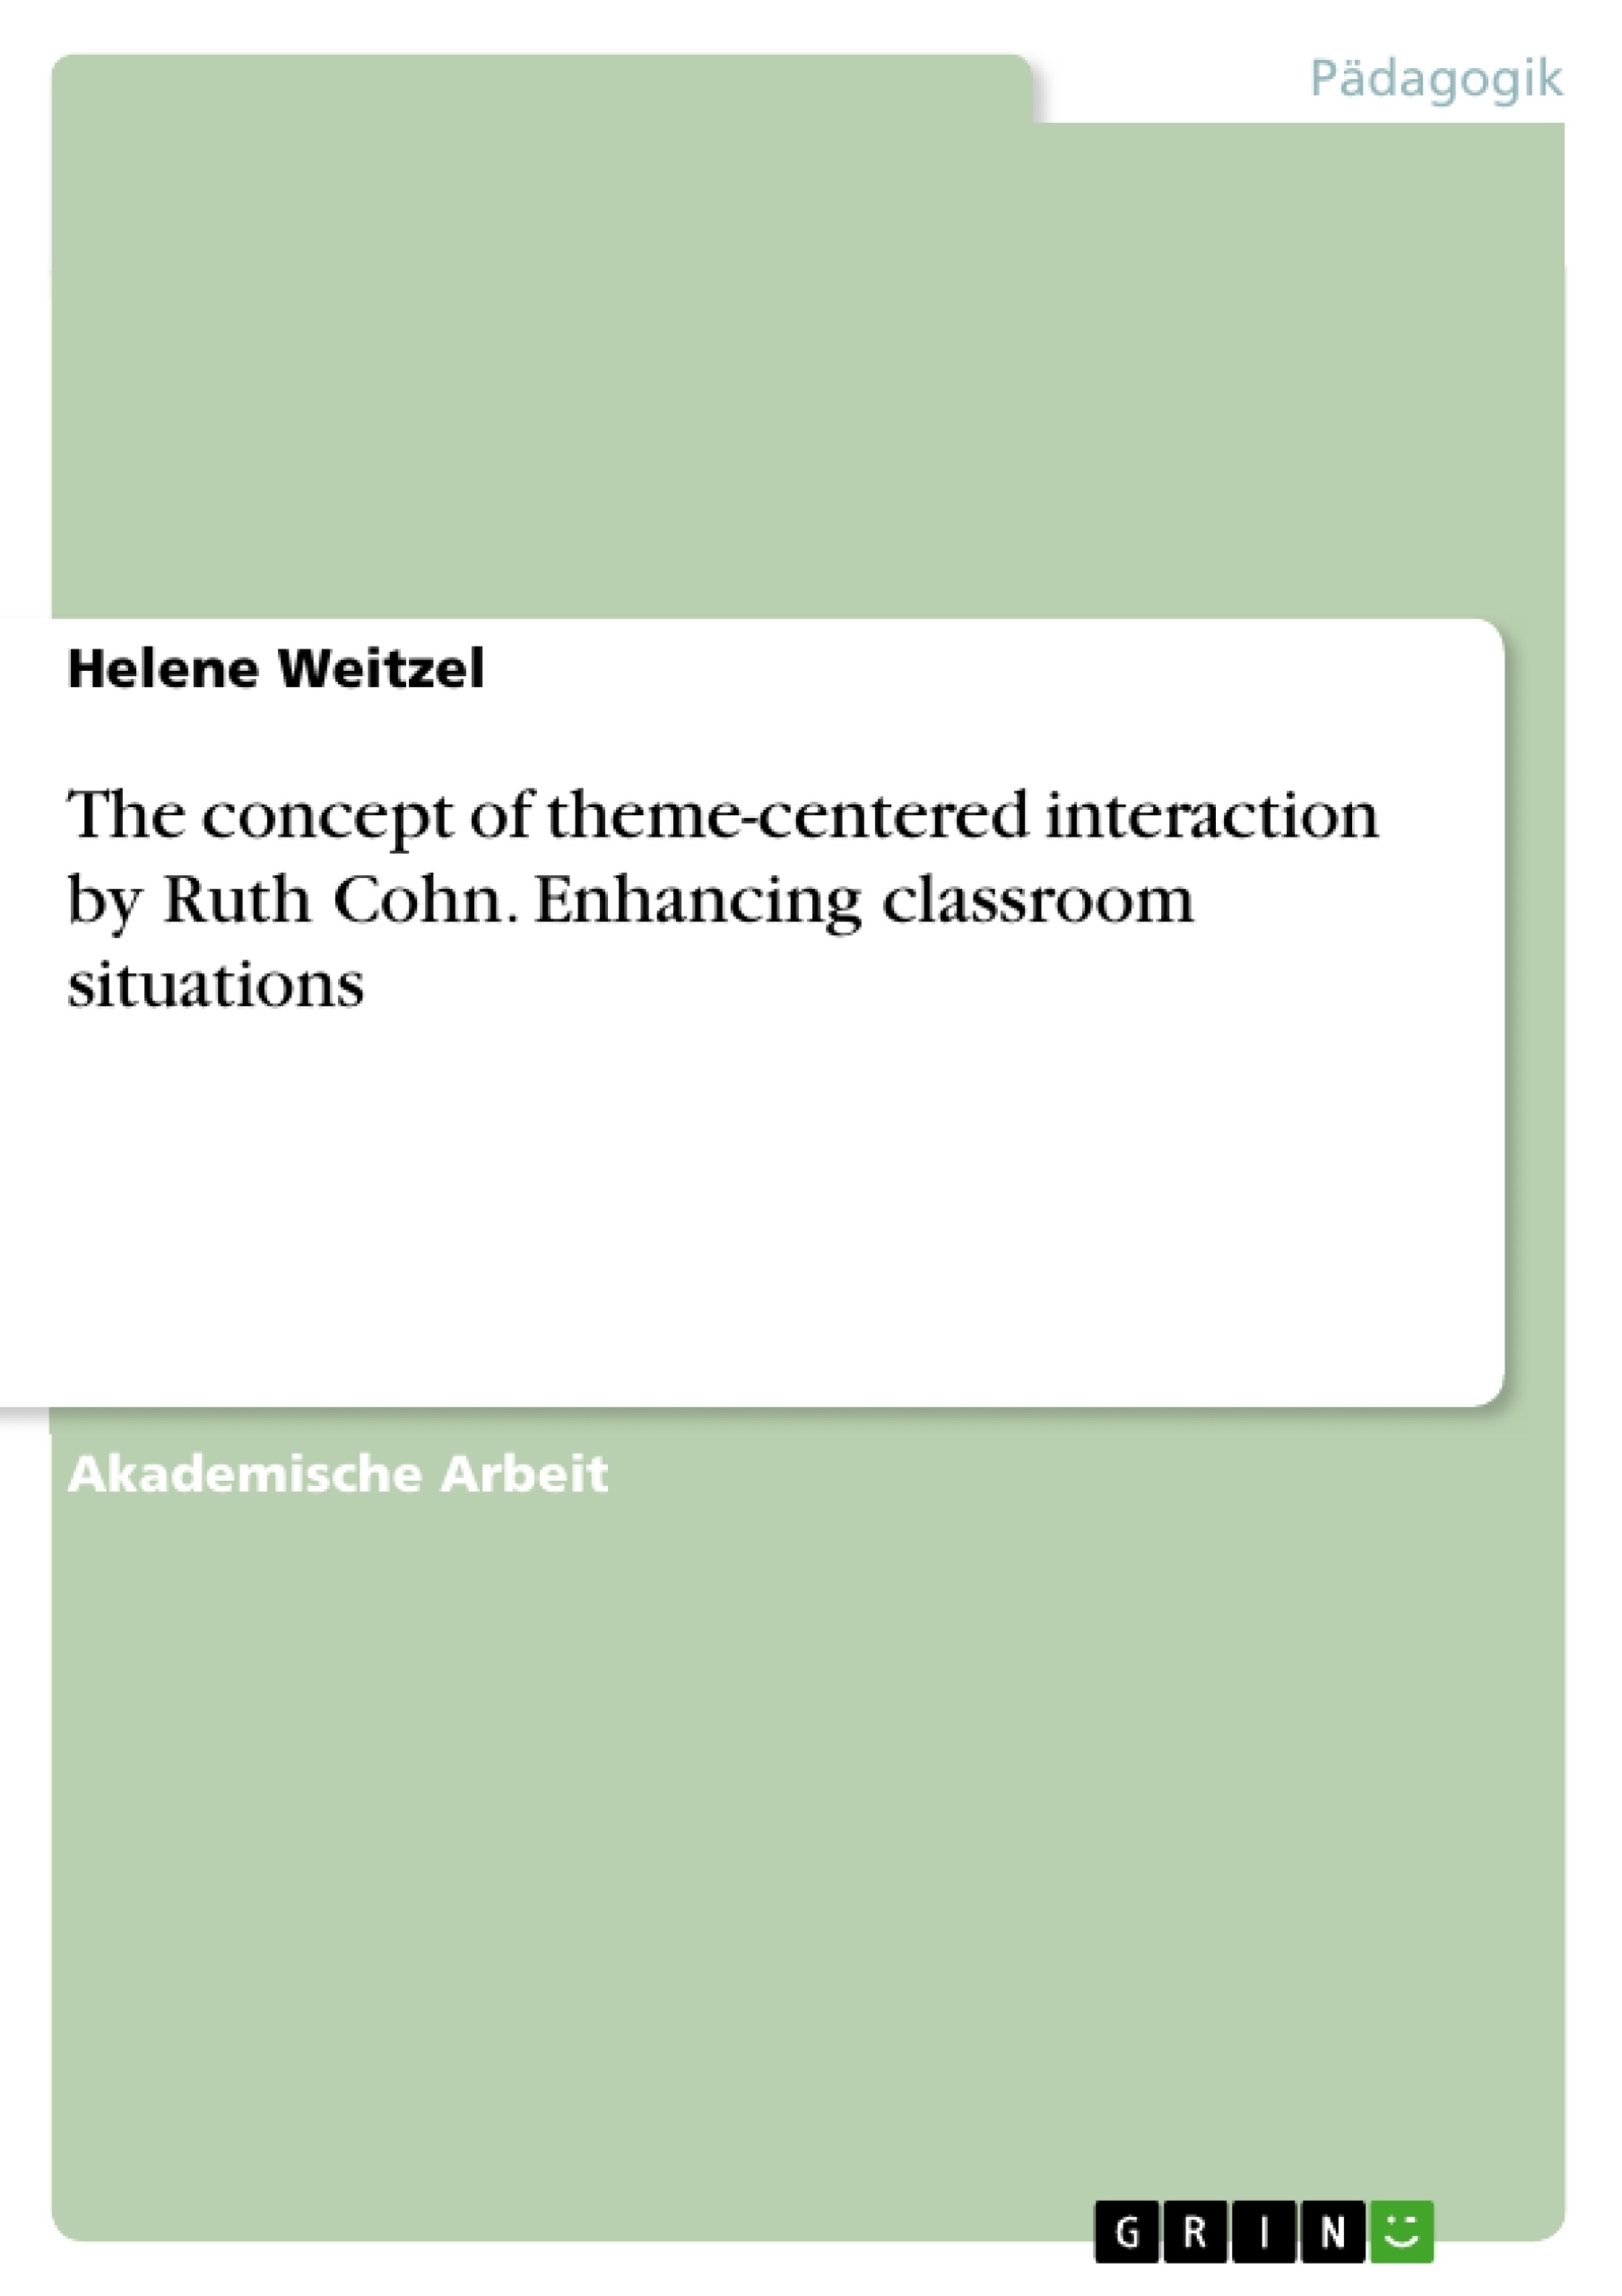 Title: The concept of theme-centered interaction by Ruth Cohn. Enhancing classroom situations